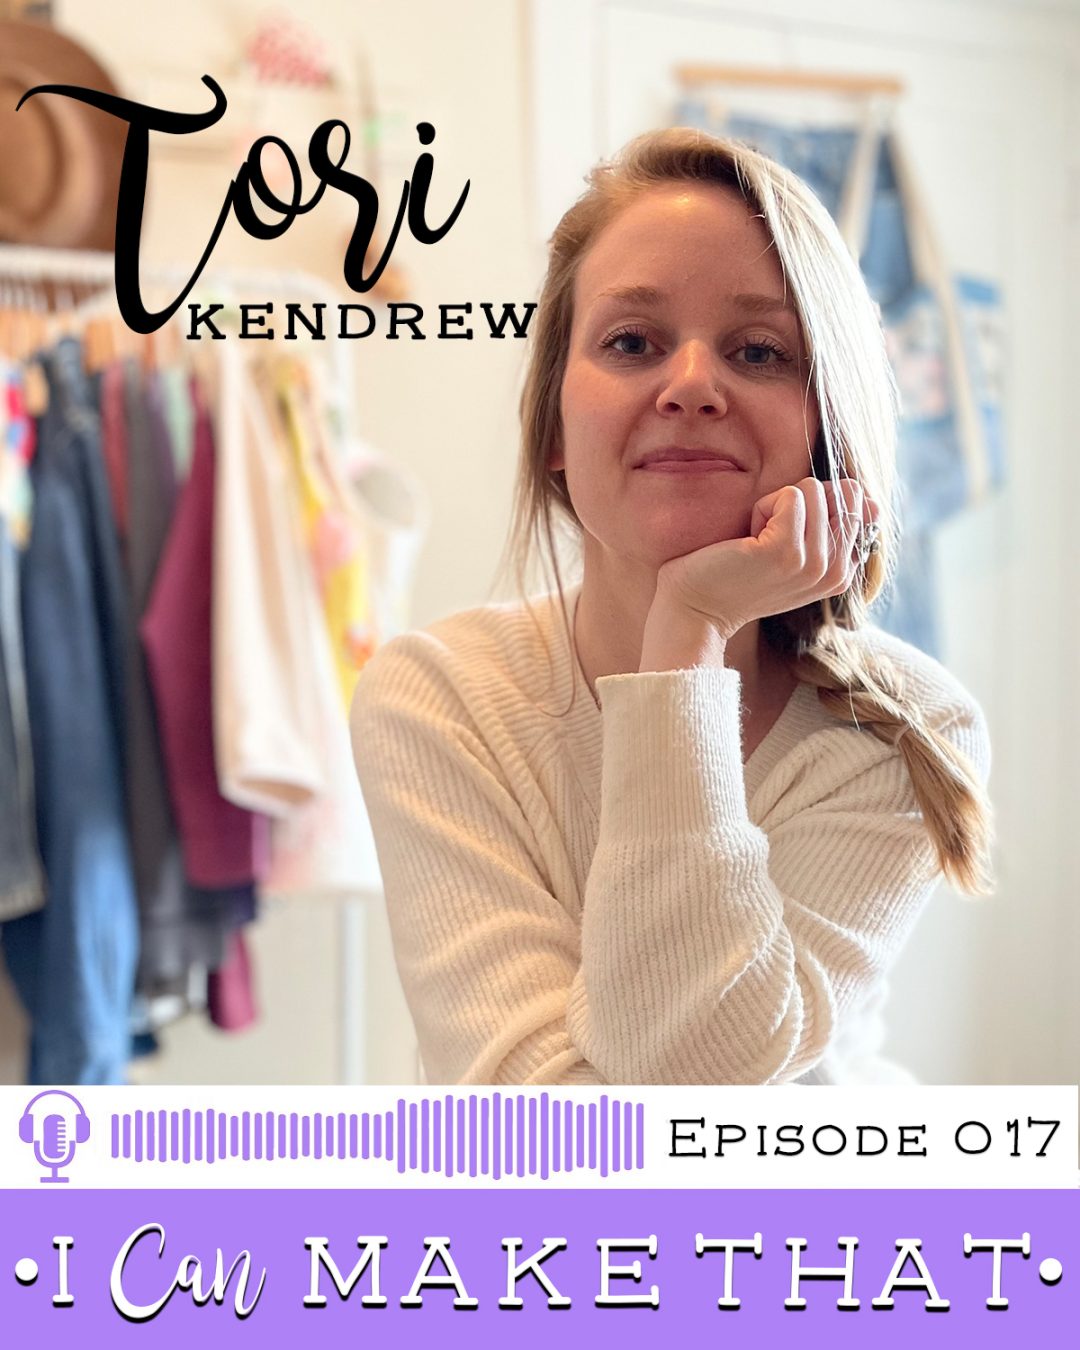 I Can Make That Podcast | Episode 017 :: Tori Kendrew, Old Friend Goods